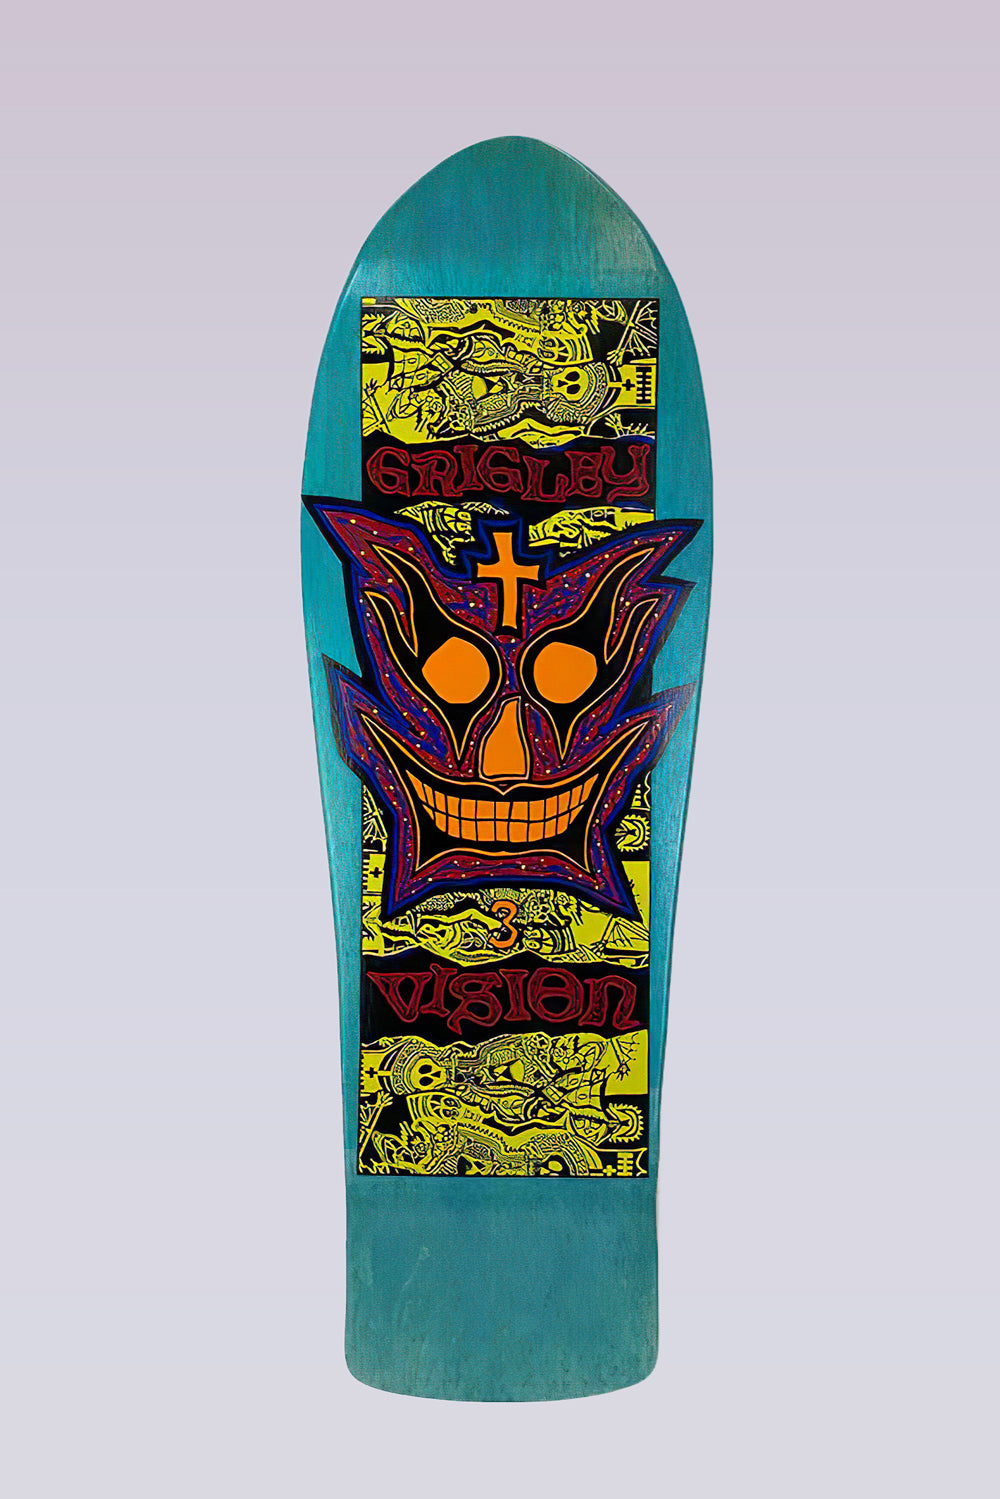 Grigley III Deck 9.75"x31" - Turquoise Stain